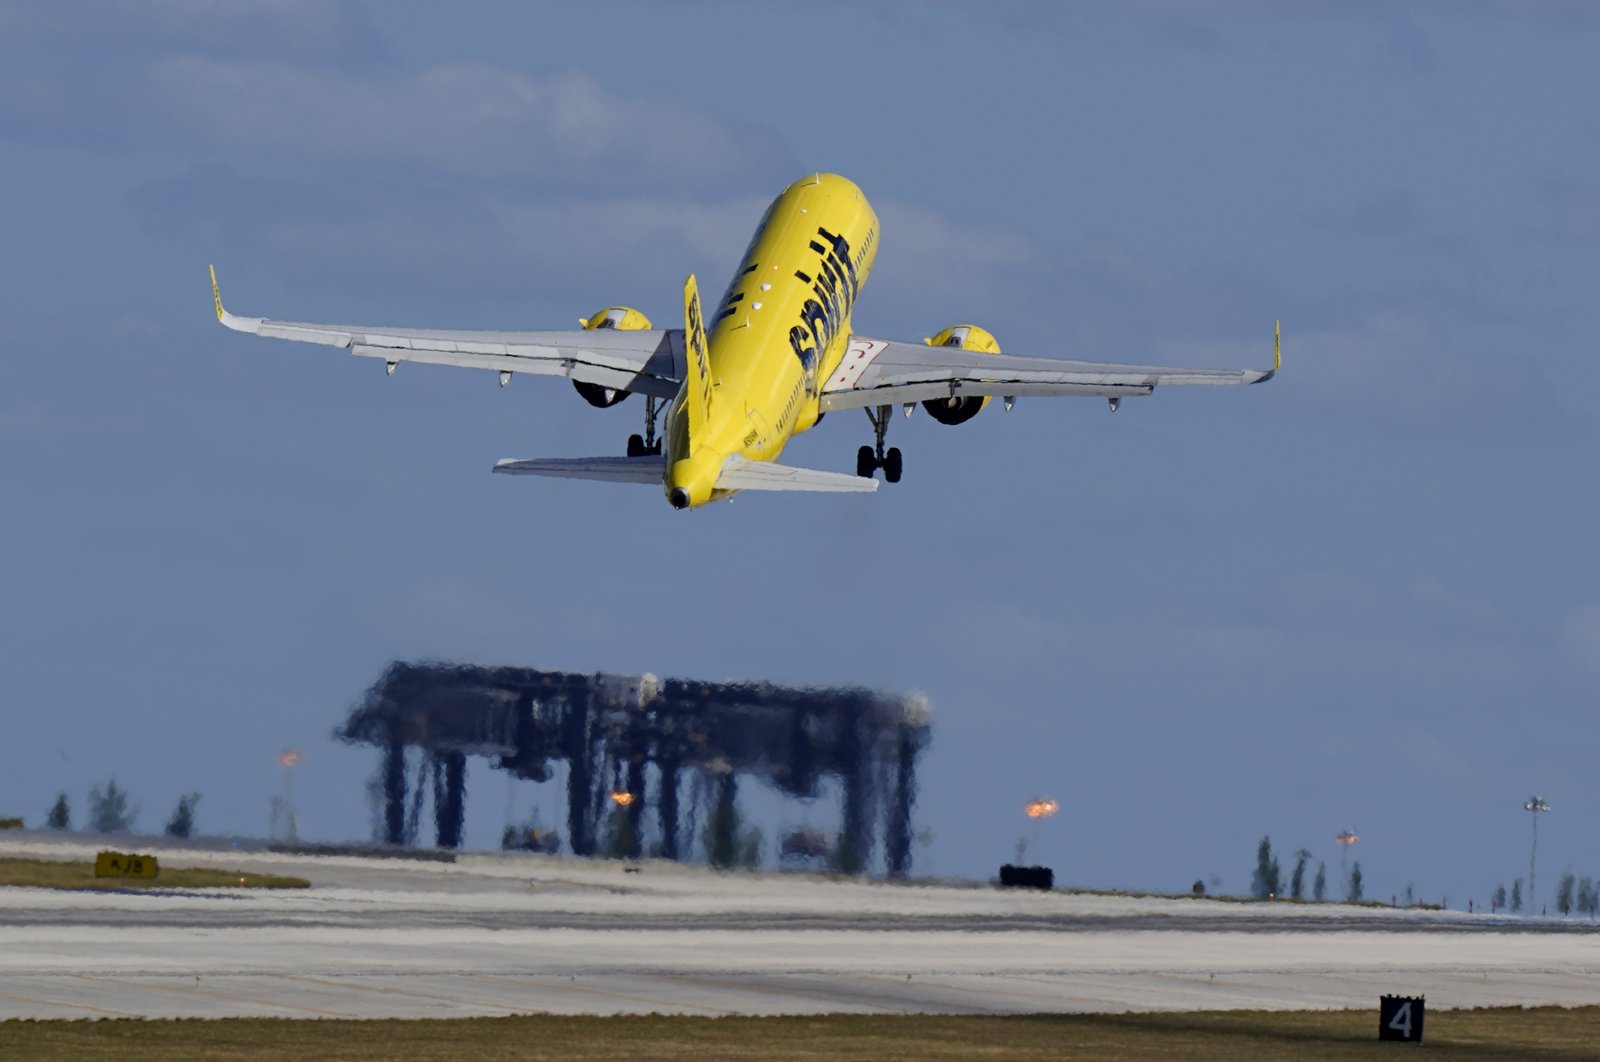 A Spirit Airlines Airbus A320 takes off from Fort Lauderdale-Hollywood International Airport in Fort Lauderdale, Florida, the U.S., Jan. 19, 2021. (AP Photo)